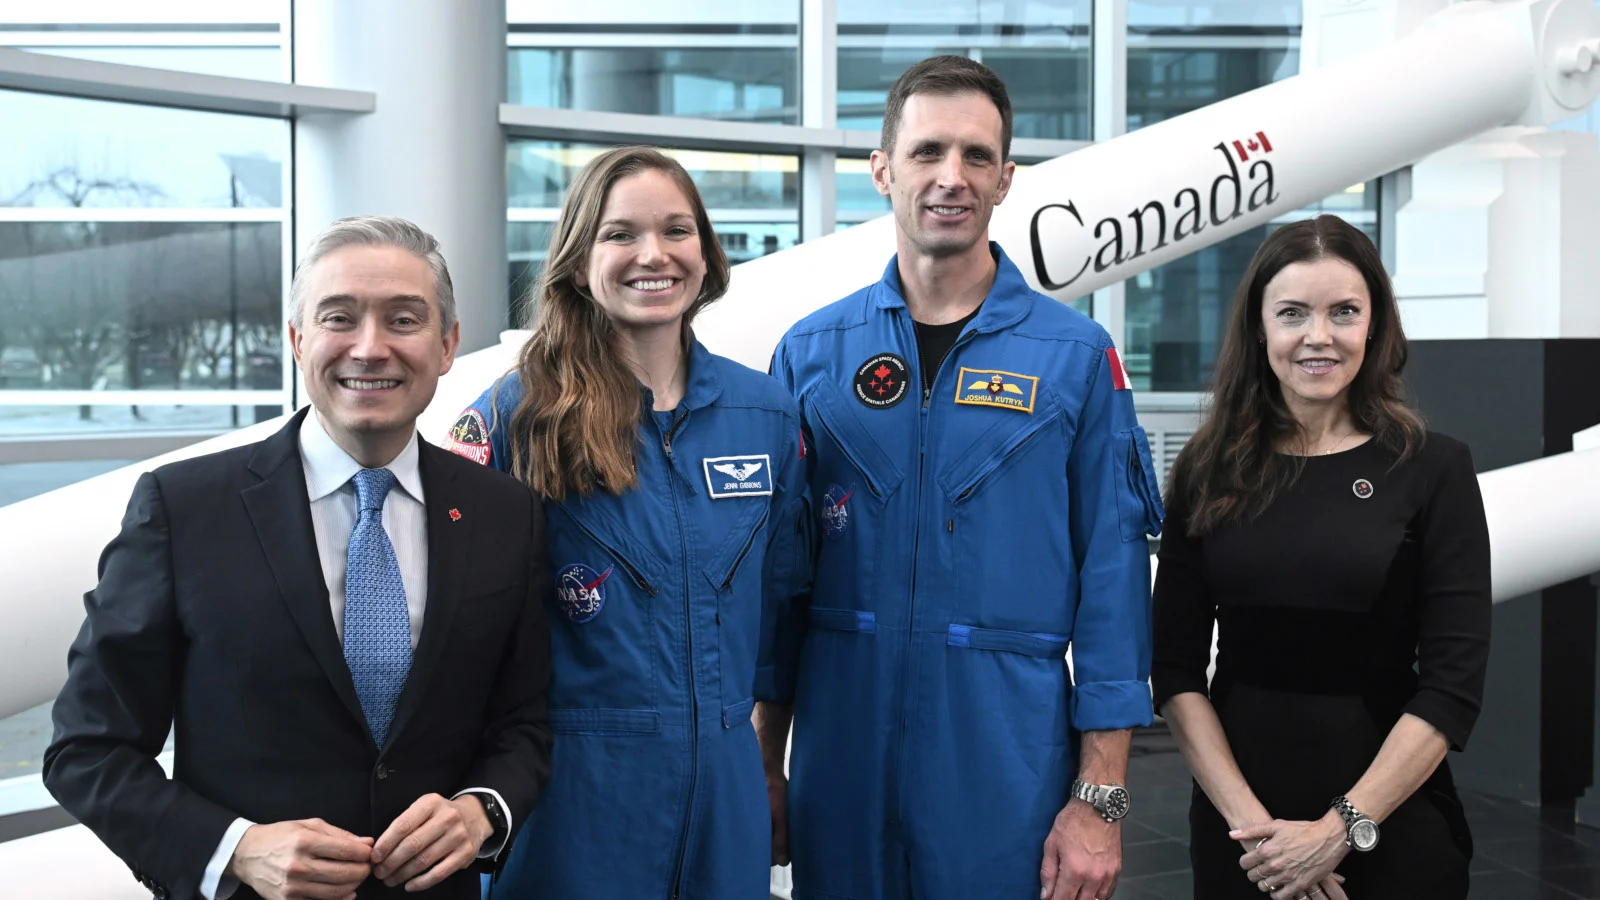 Minister Champagne announces new assignments for CSA astronauts